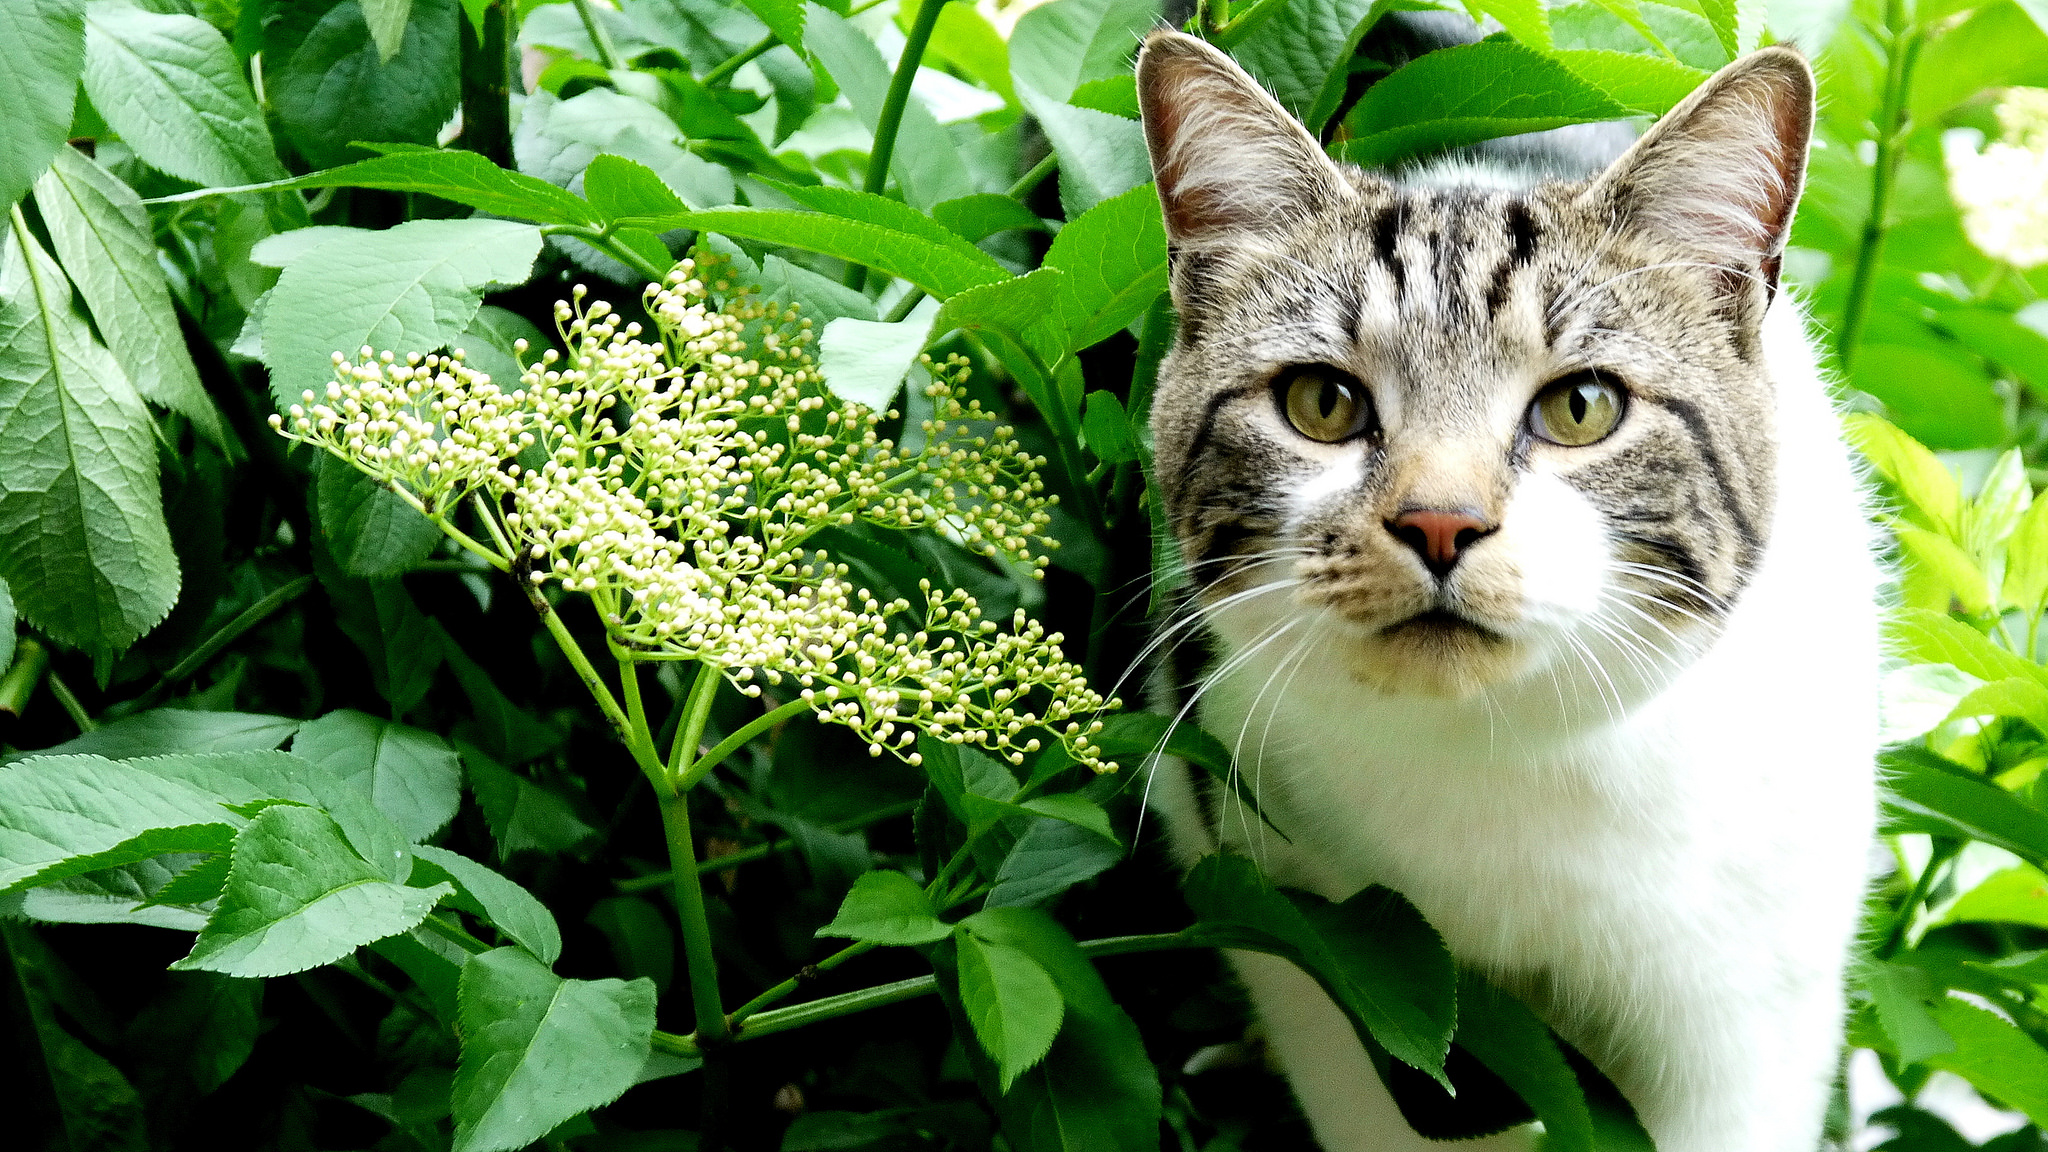 How to keep frustrating felines out of the garden